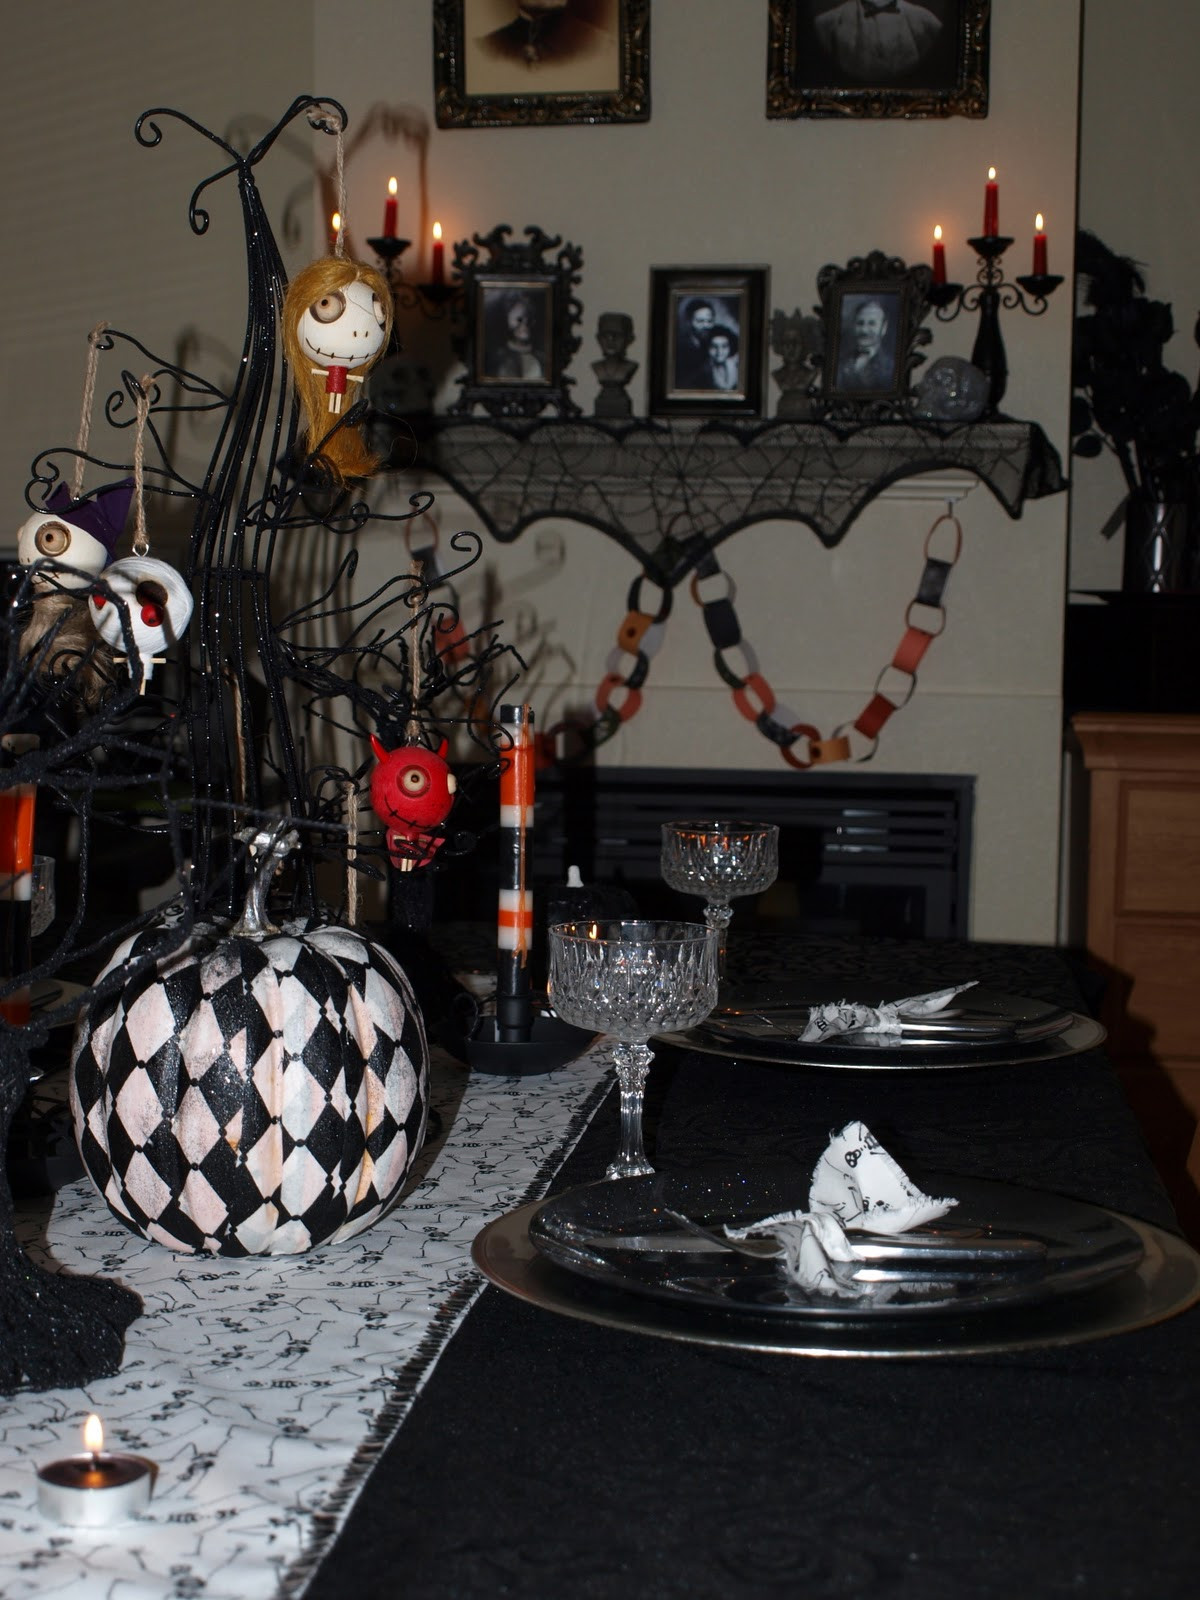 The Nightmare Before Christmas Birthday Party Ideas
 Measurements of Merriment "The Nightmare Before Christmas